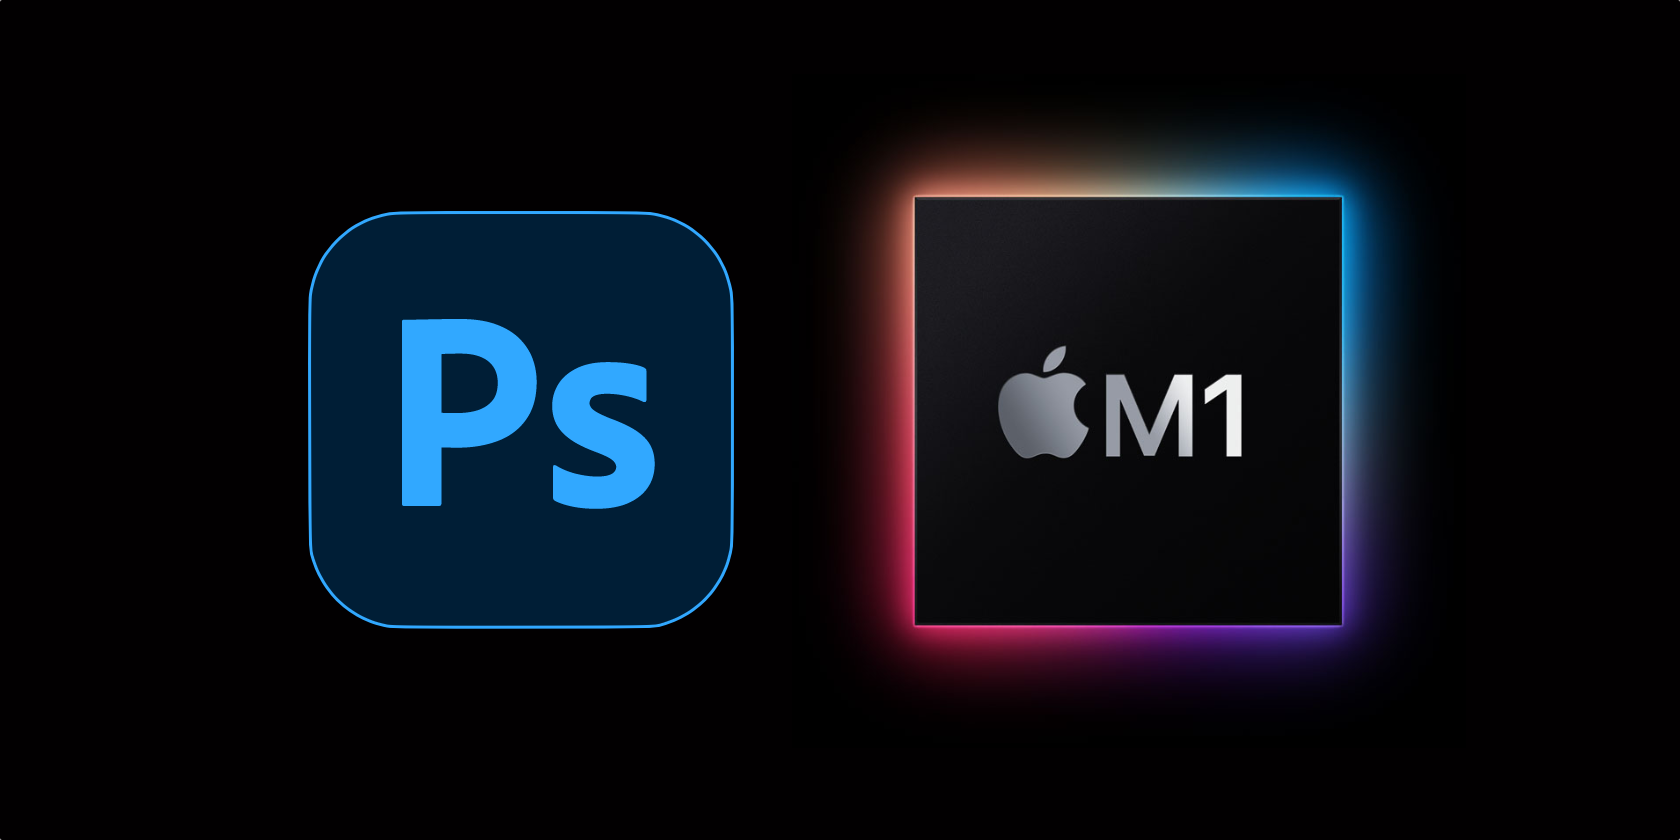 An illustration showing the Photoshop logo next to the Apple M1 chip logo against a dark background